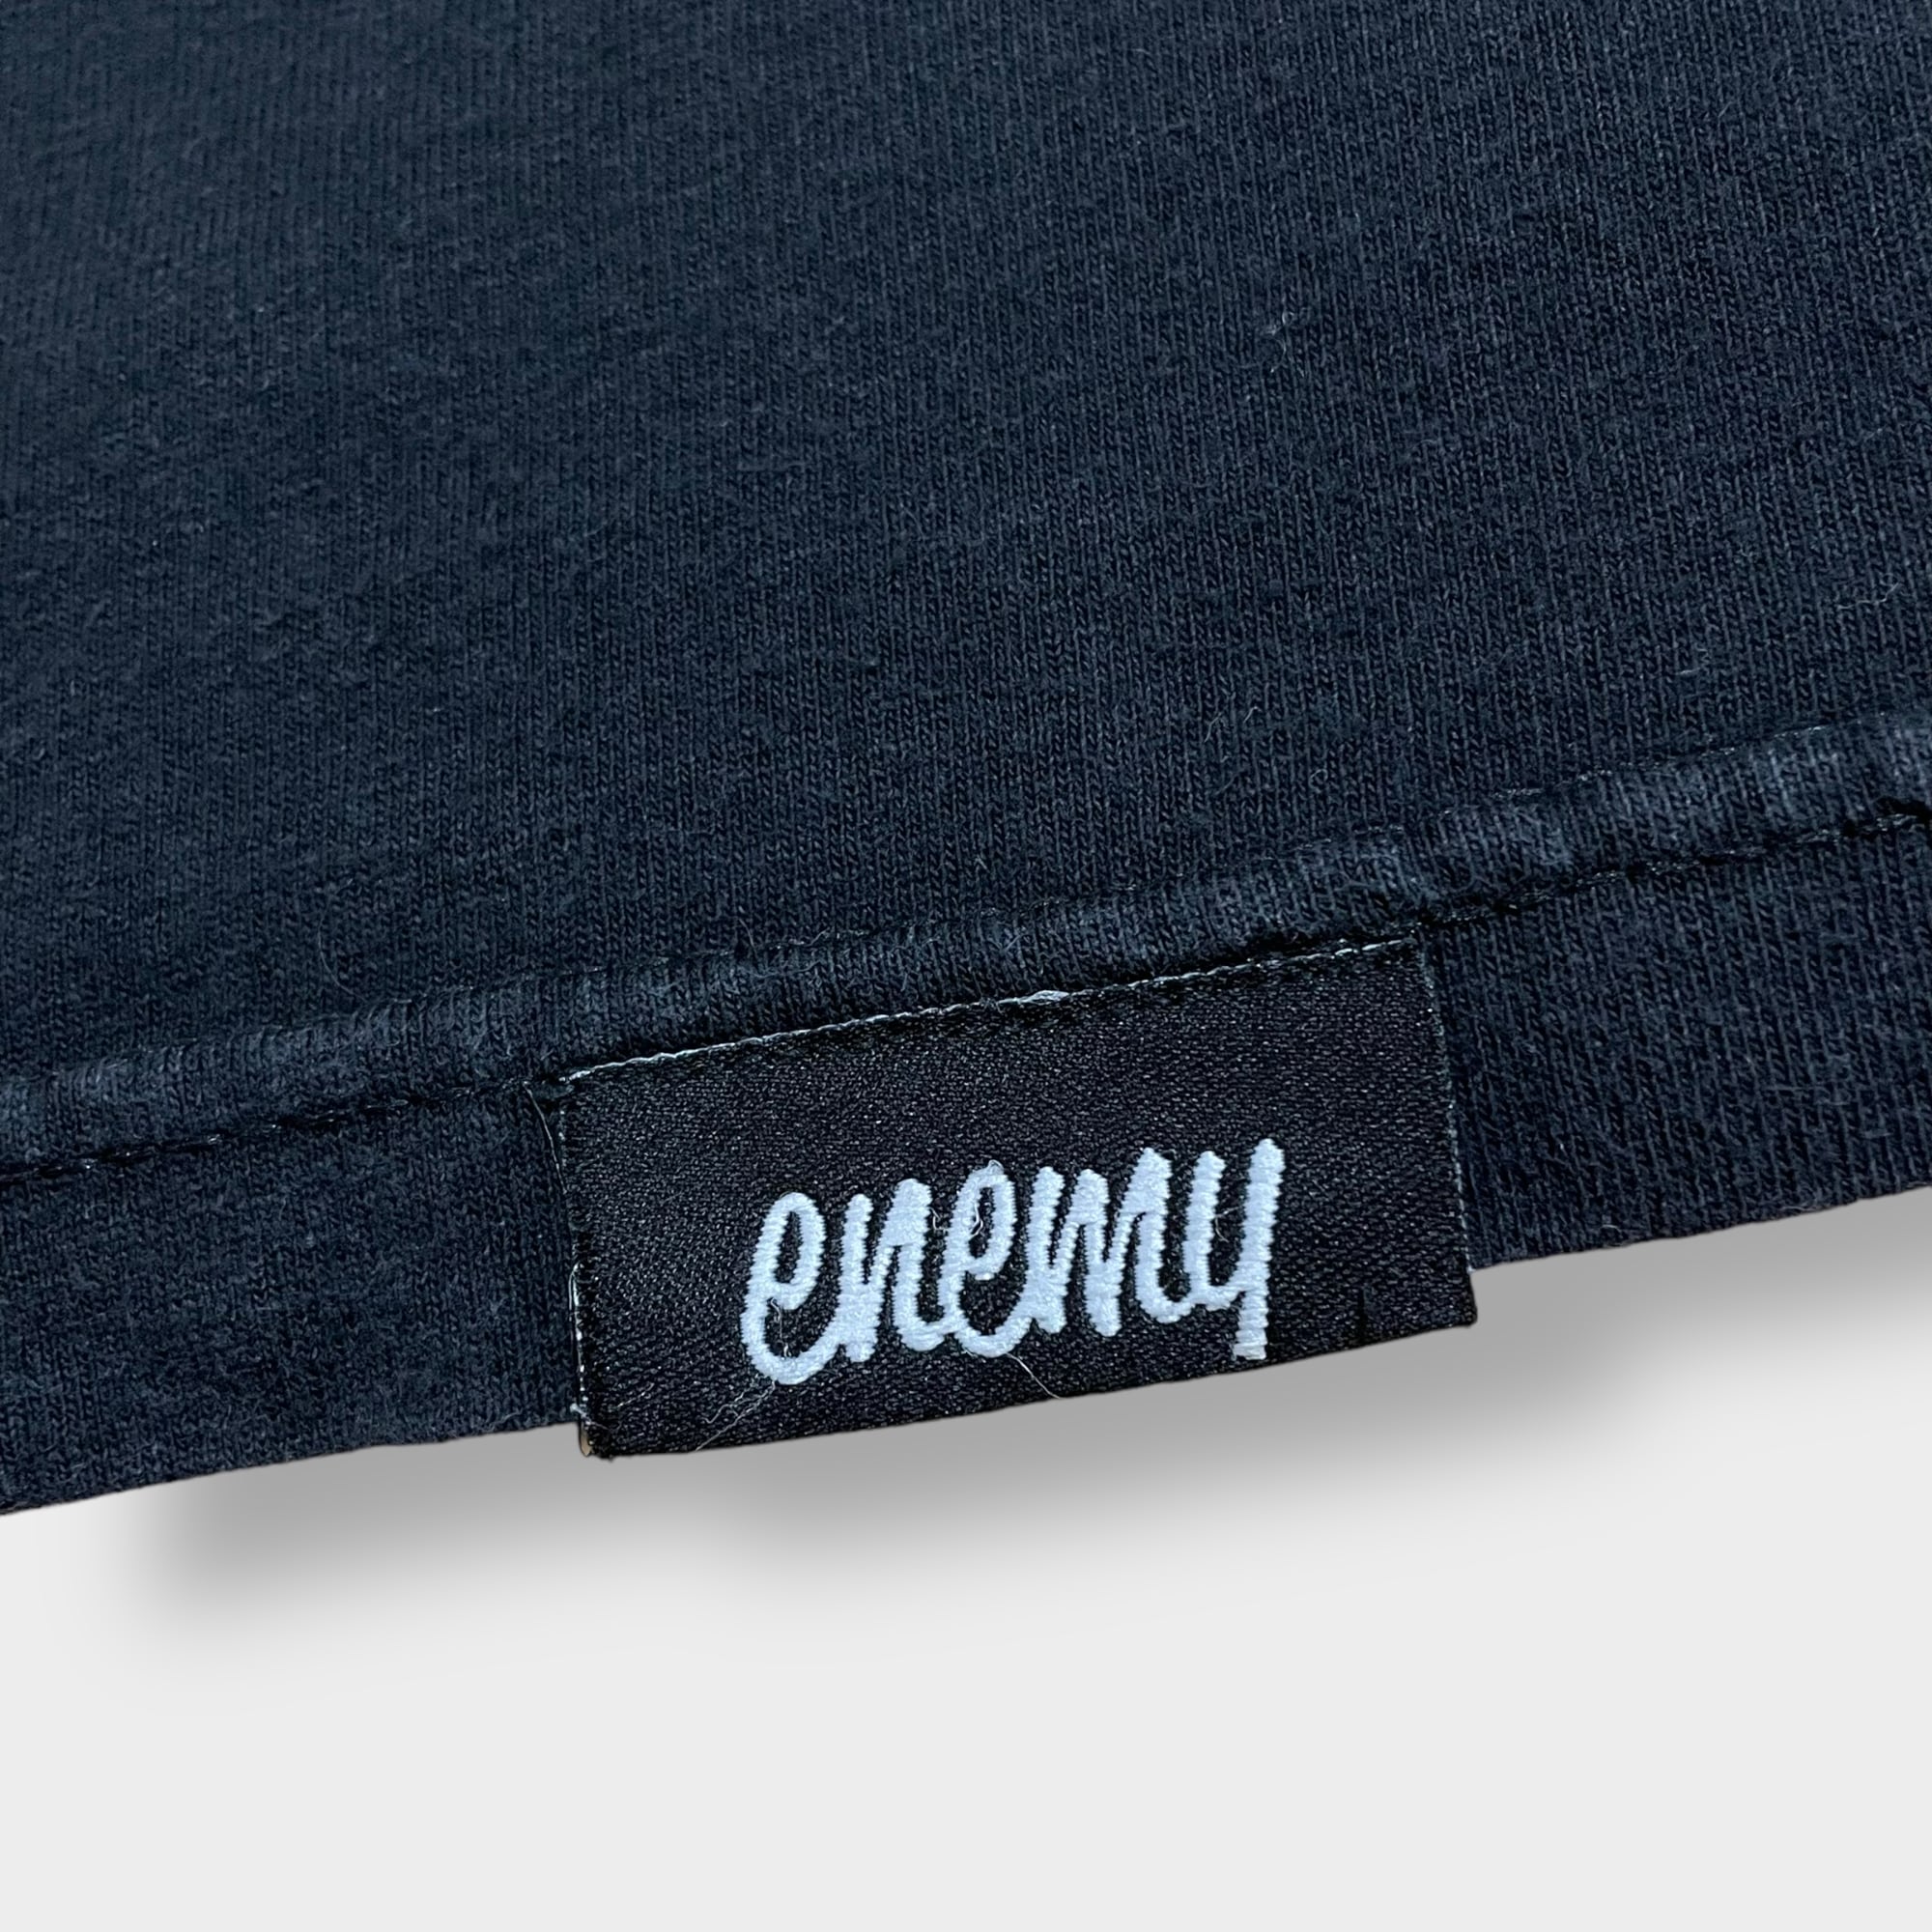 ENEMY OF THE STATE】USA製 3XL ビッグシルエット ボクシング Tシャツ